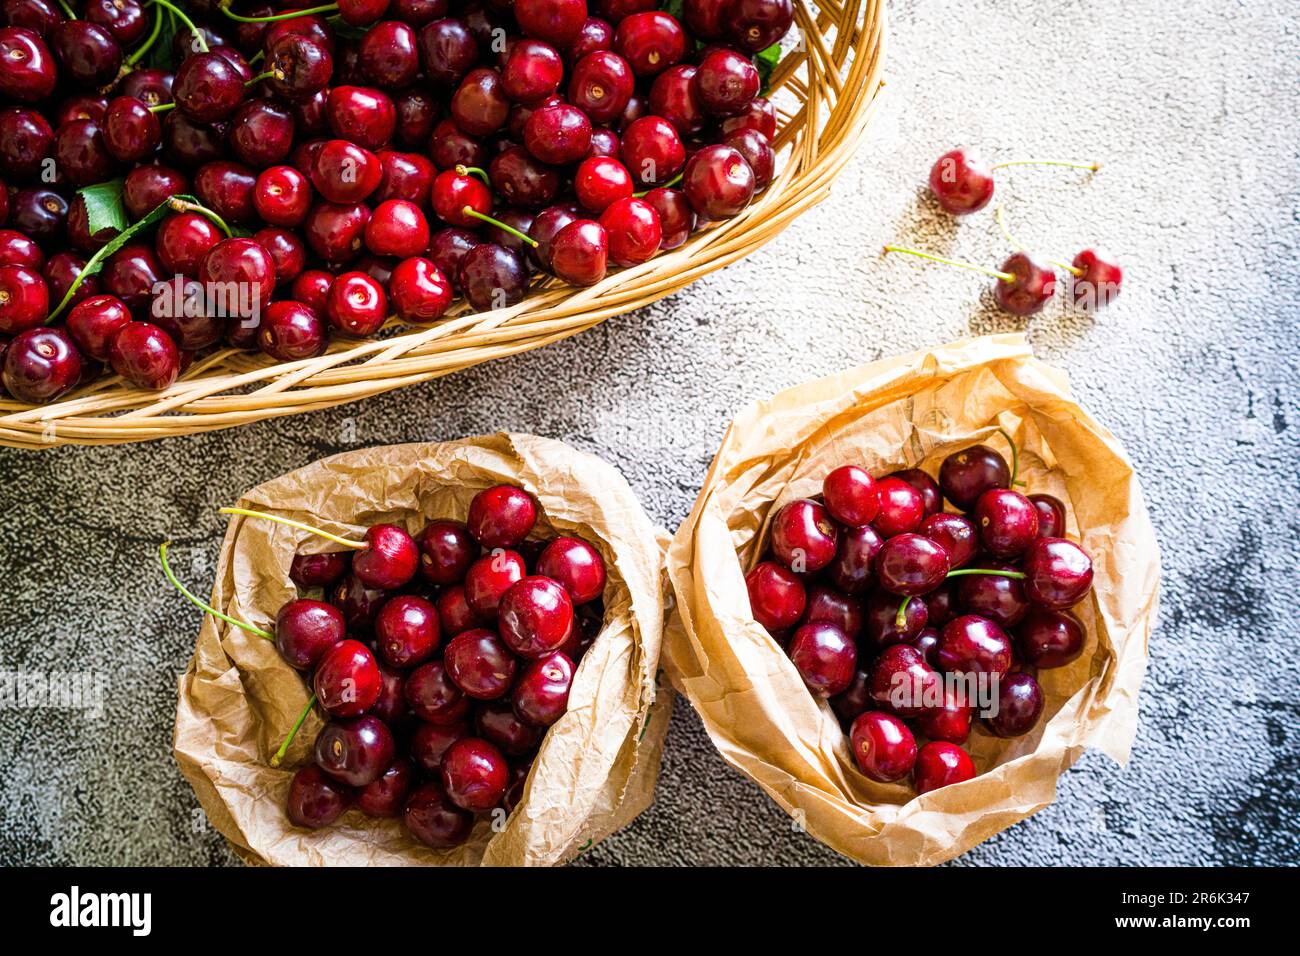 Red organic cherries in baskets ready to eat from above, Italy, Europe Stock Photo